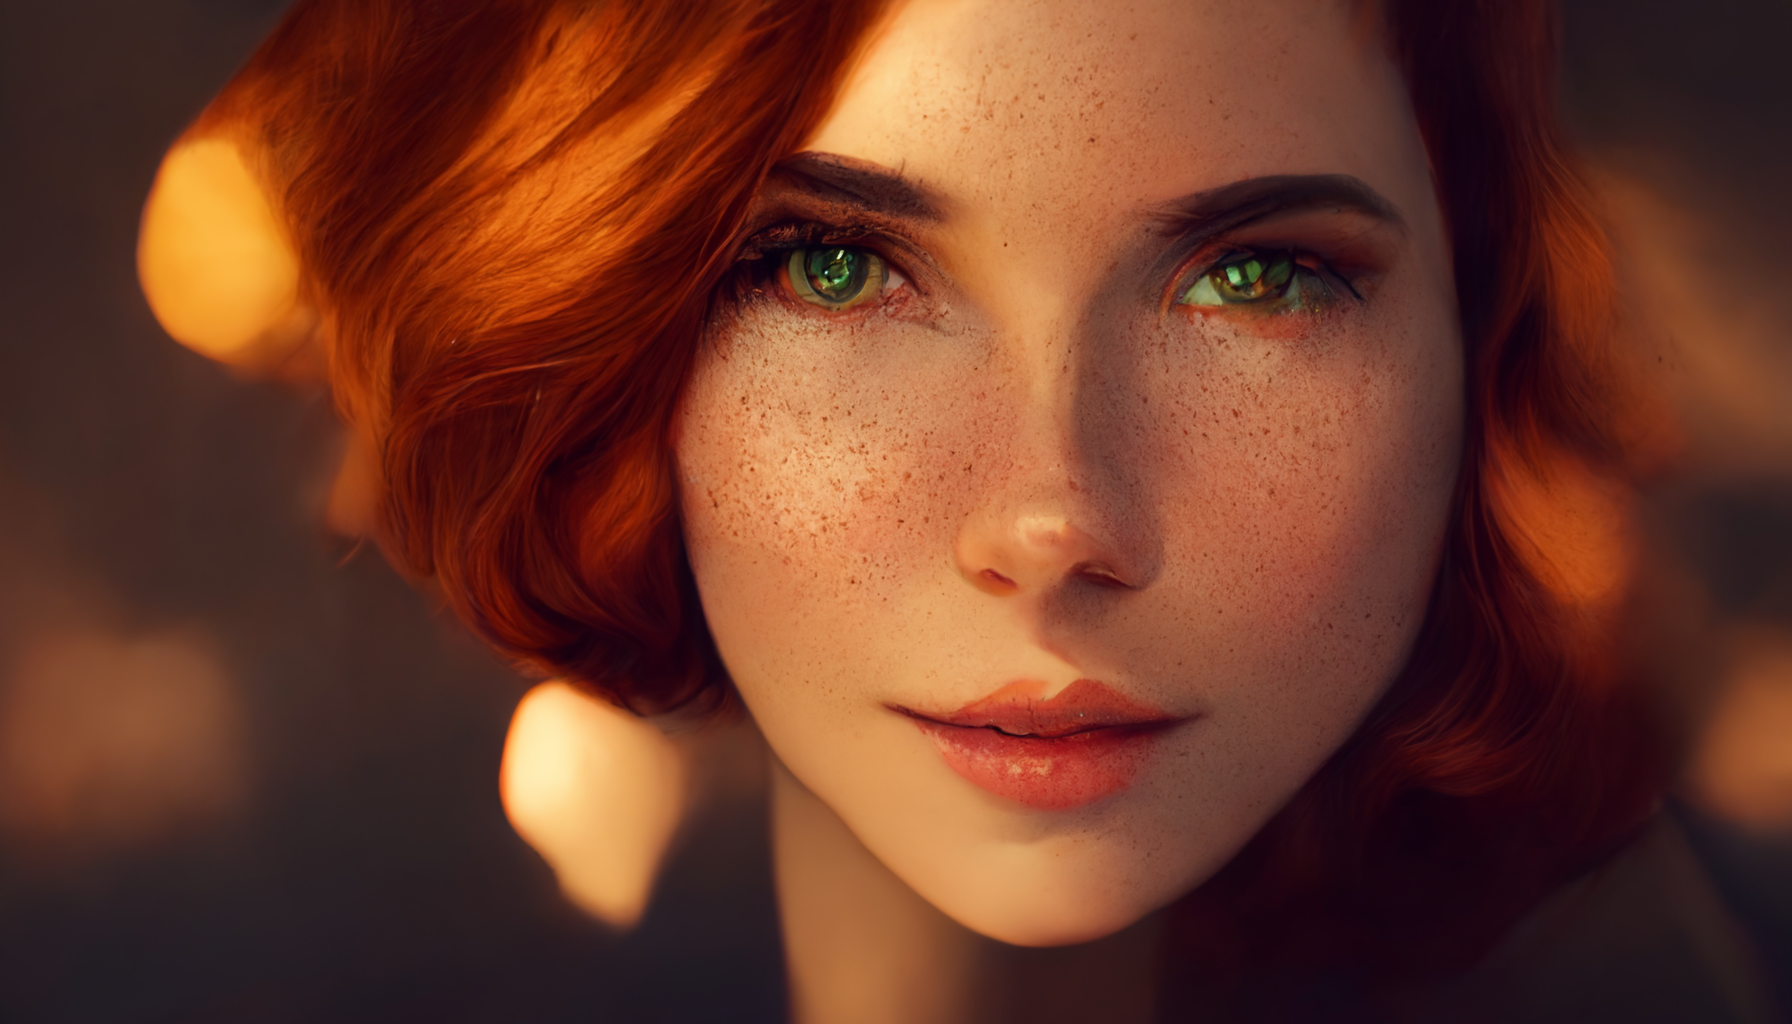 1. "Auburn Hair and Freckles: A Perfect Combination for Blue Eyes" - wide 3